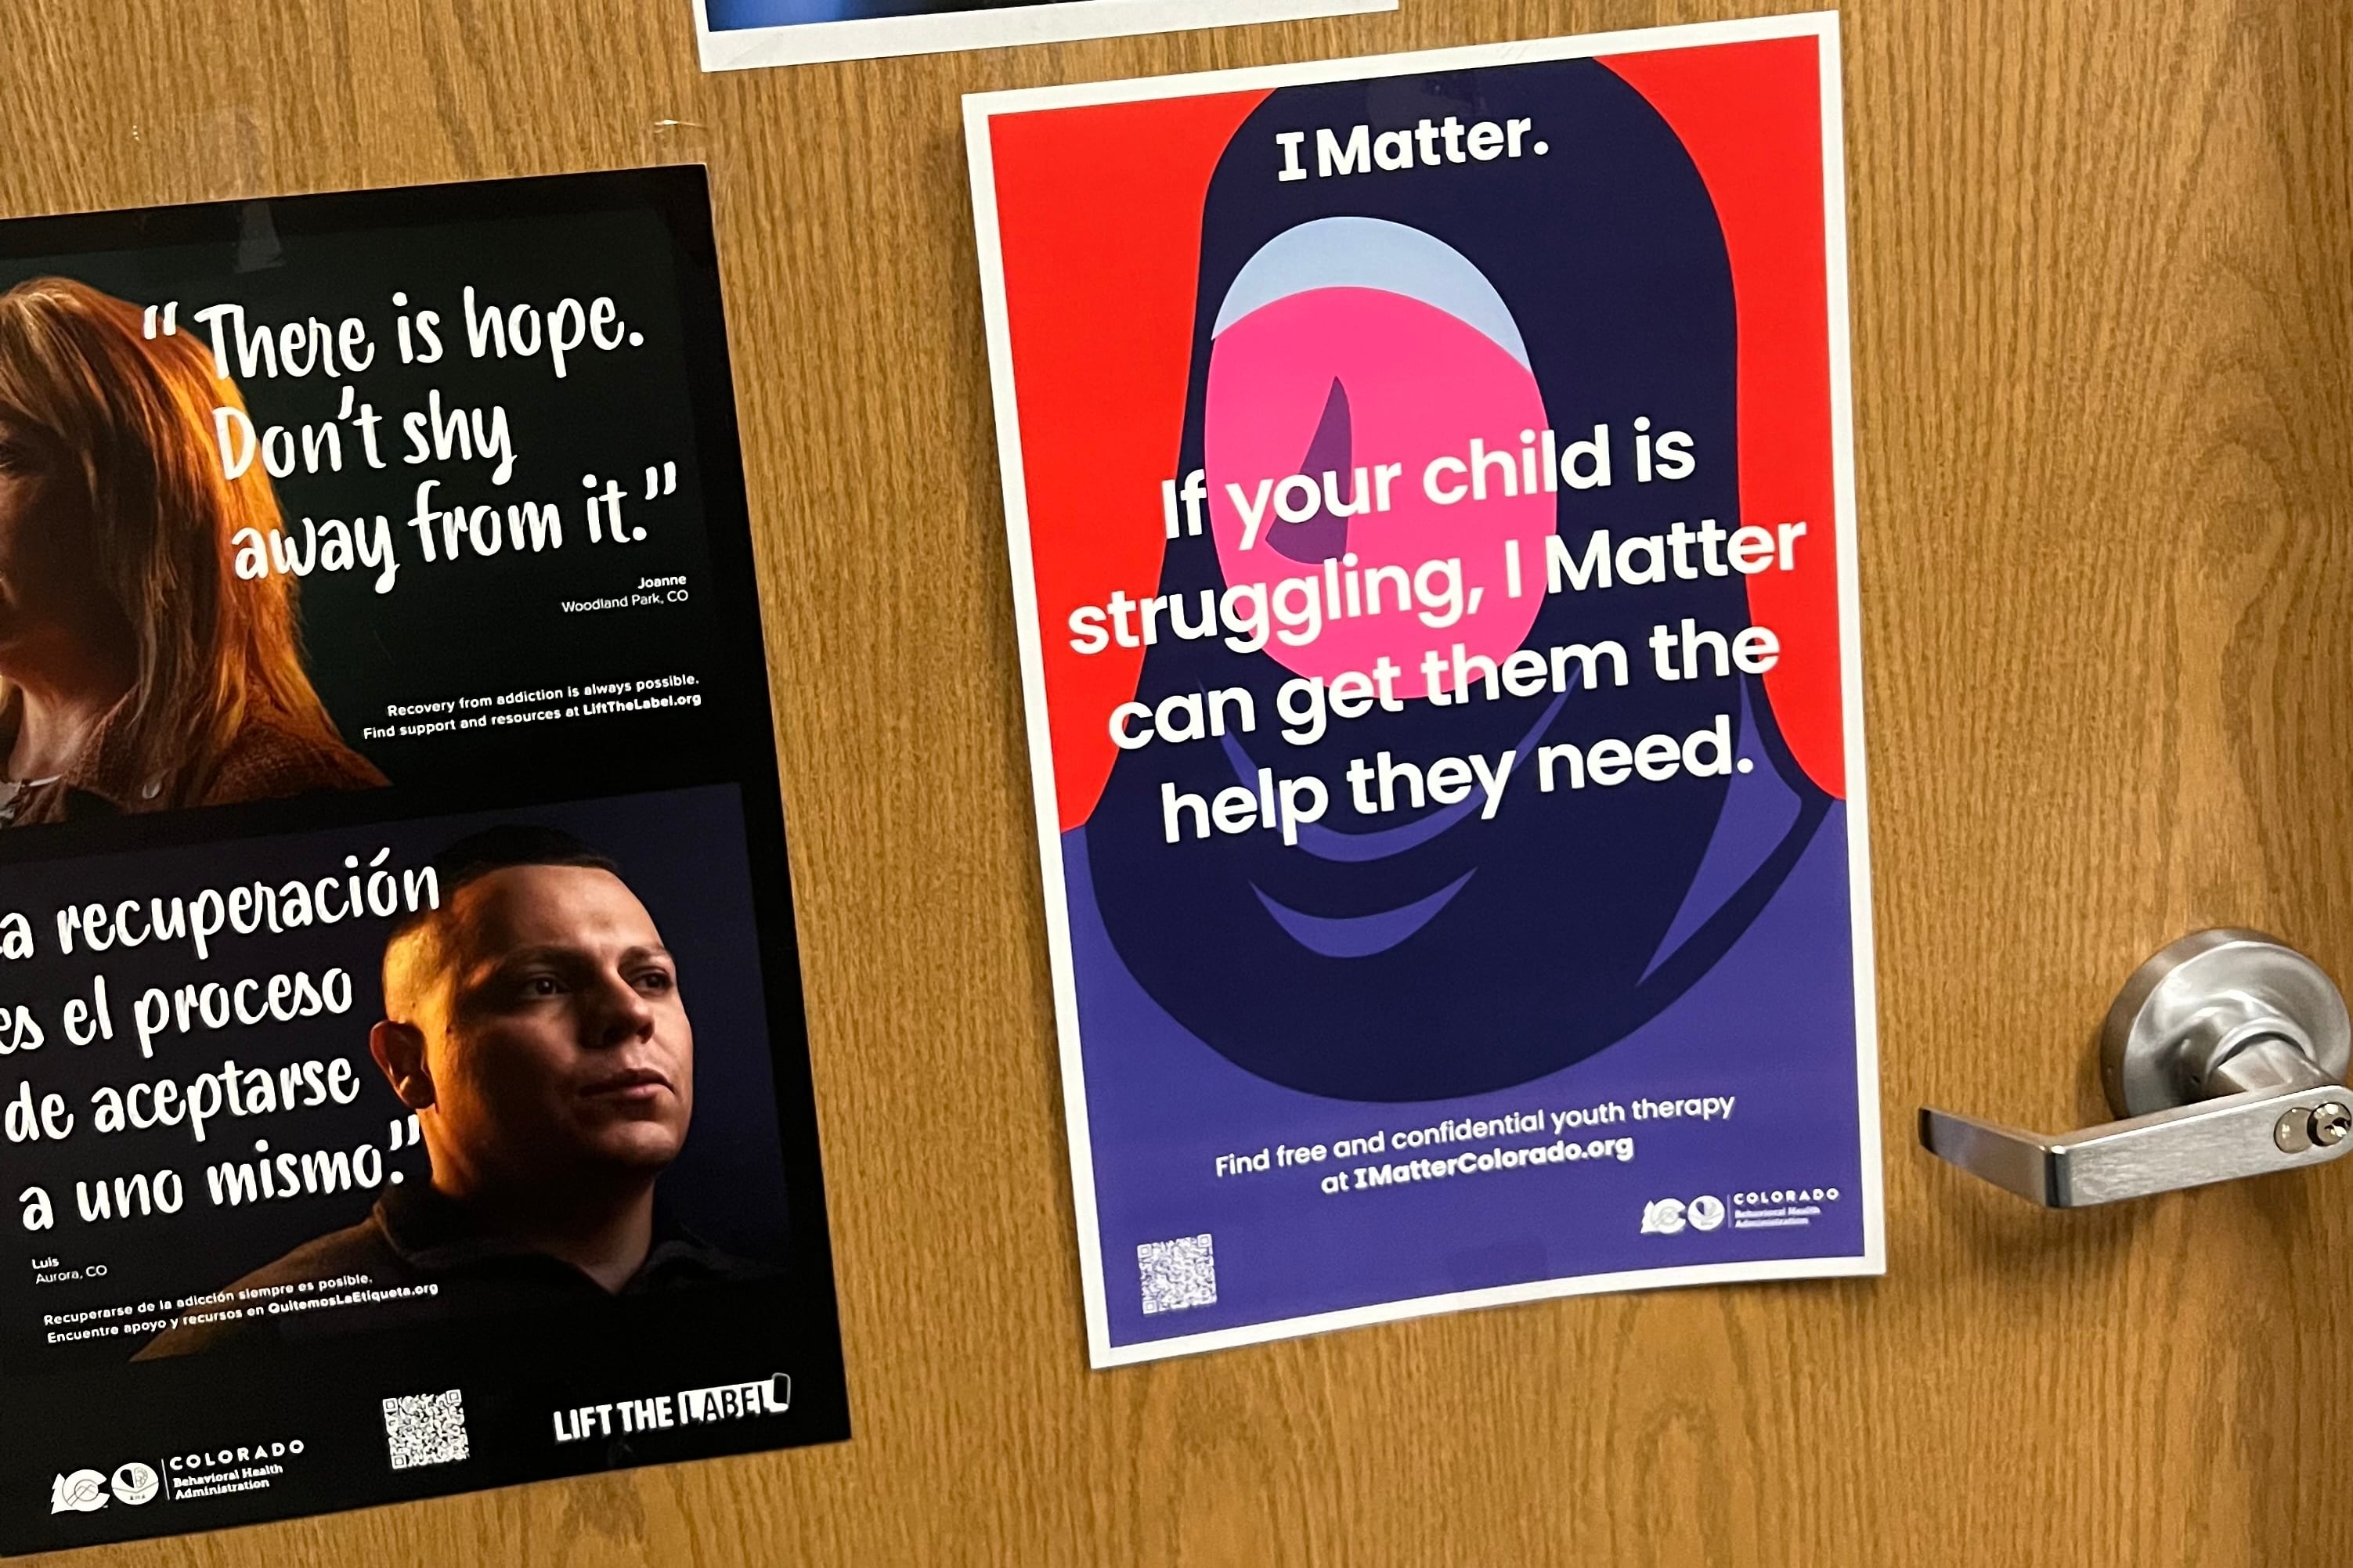 A red and purple poster on a wooden door advertises a free therapy program for students.